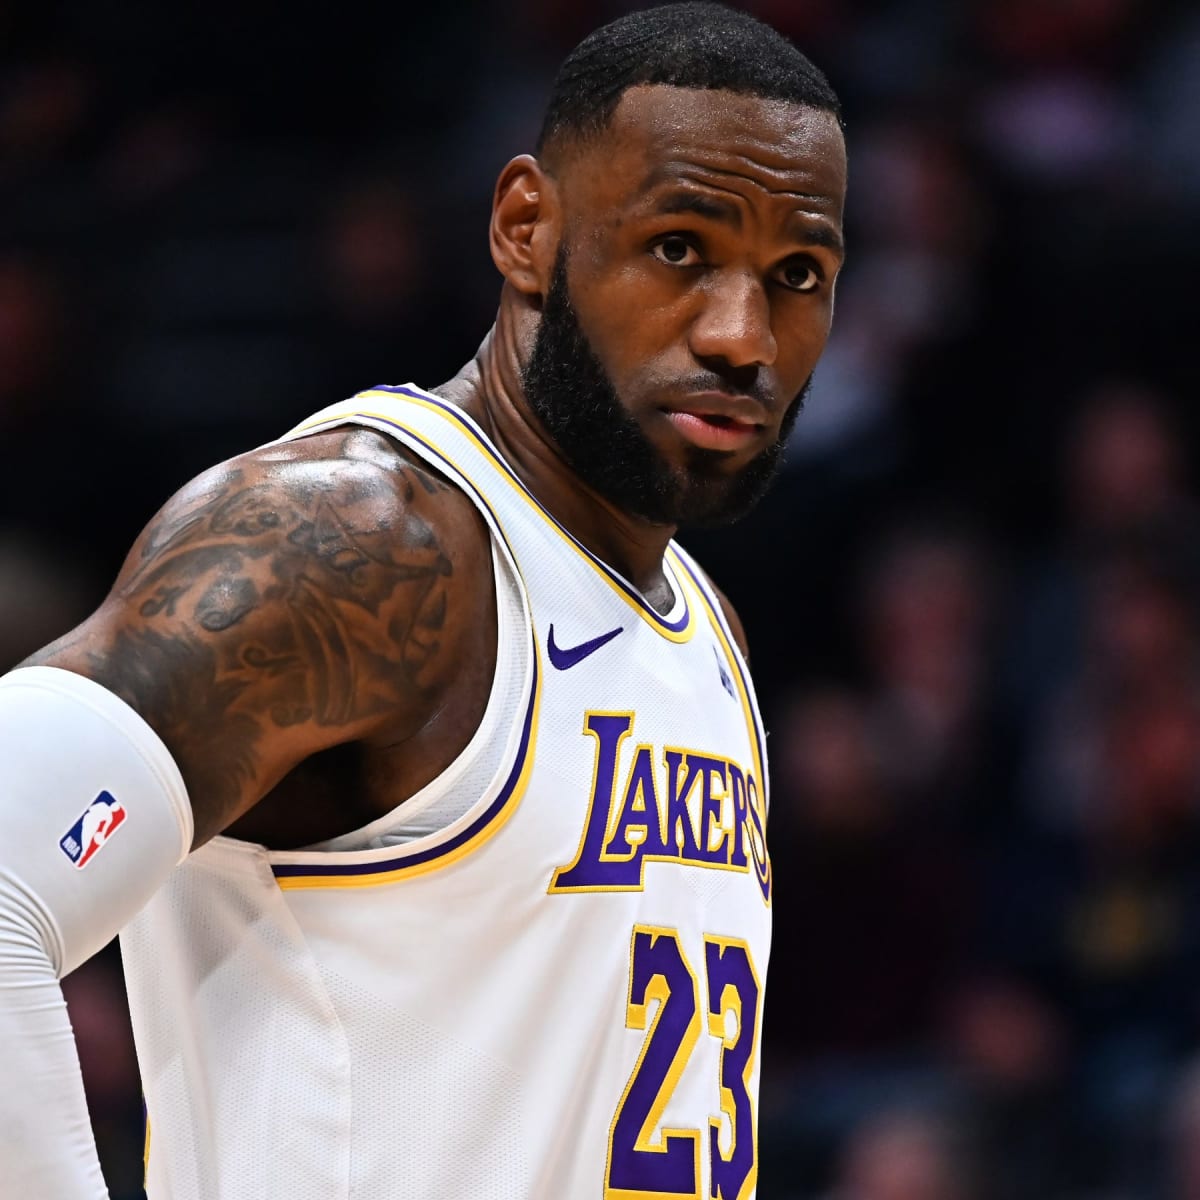 Lakers' Owner Talks Signing LeBron